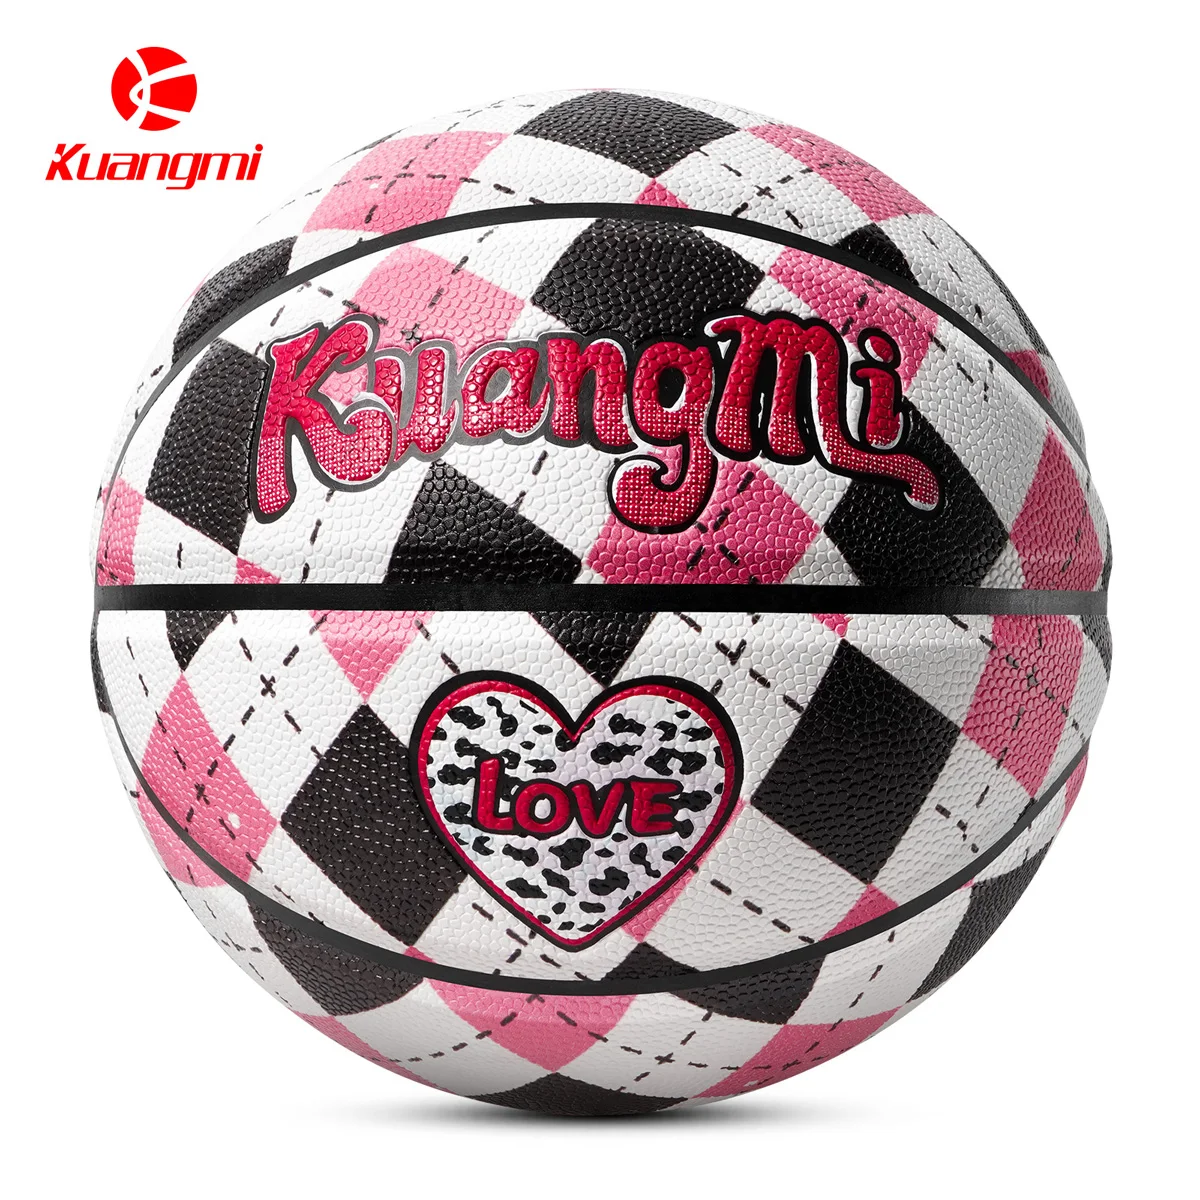 Kuangmi High Quality Basketball Ball Official Size 7 Anti-Slip PU Material Outdoor Indoor Match Training Game Balls